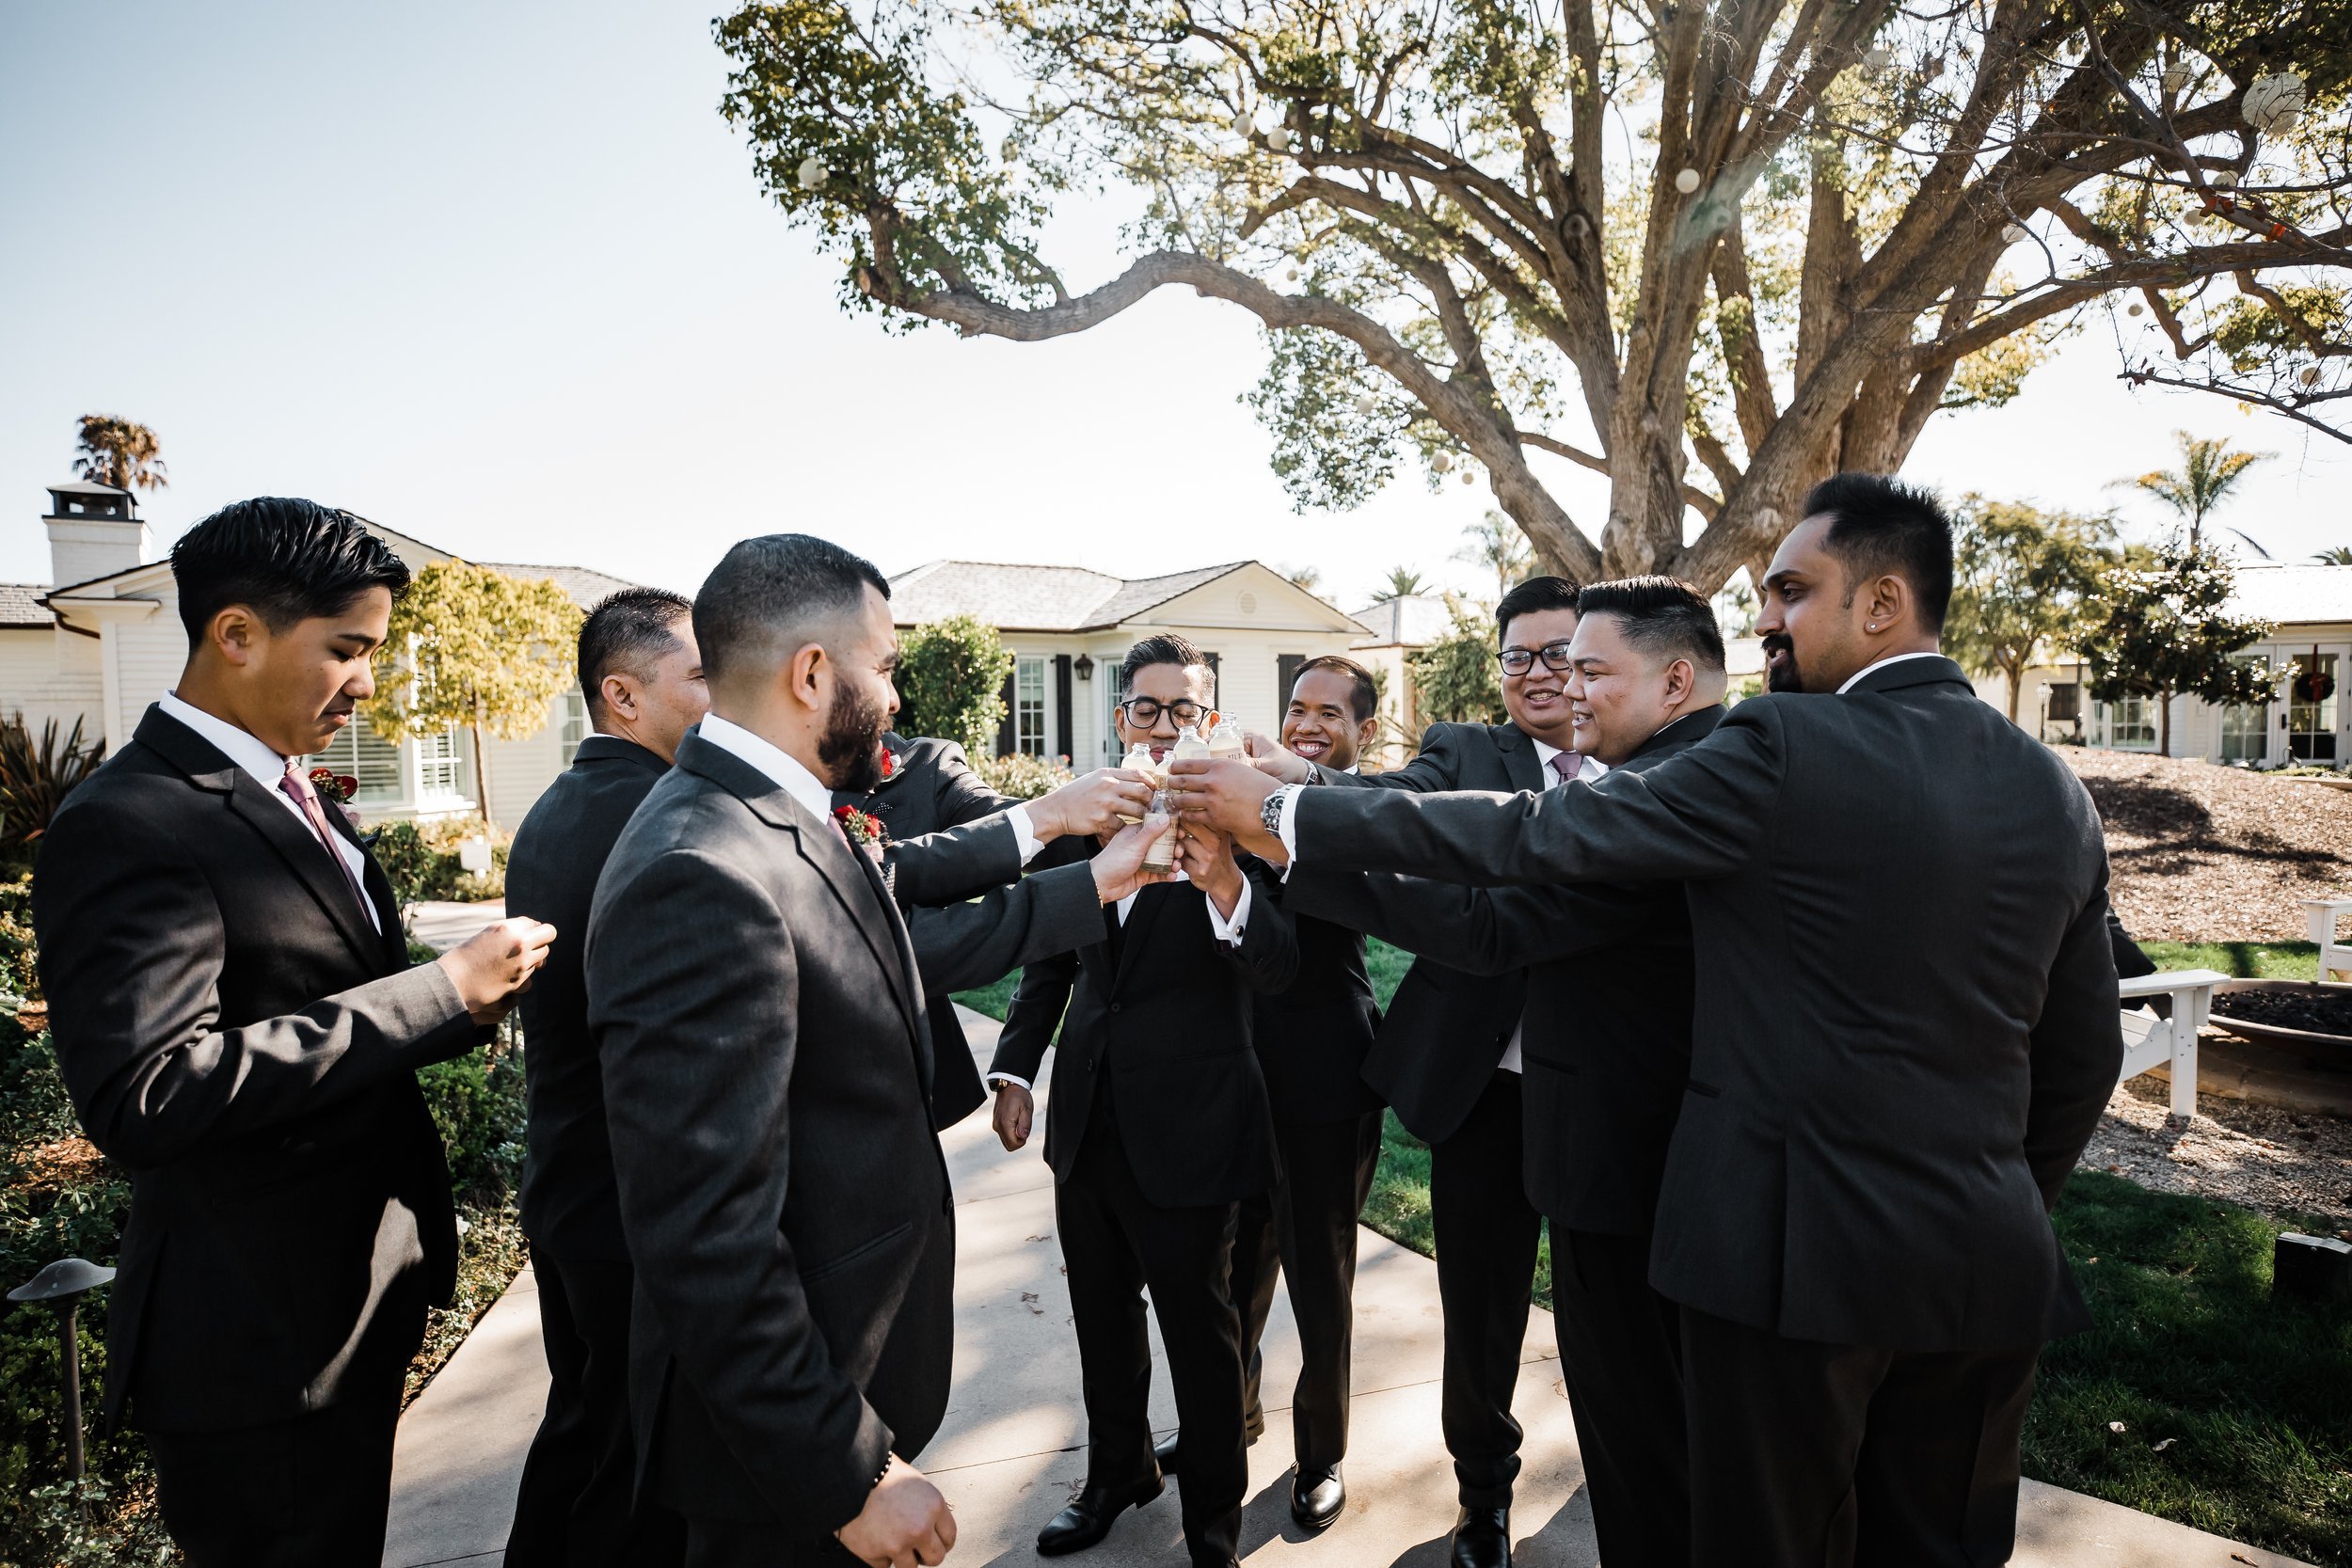 www.santabarbarawedding.com | Old Mission SB | Events by Maxi | Michelle Ramirez | Tangled Lotus | Groom Taking a Shot with His Groomsmen